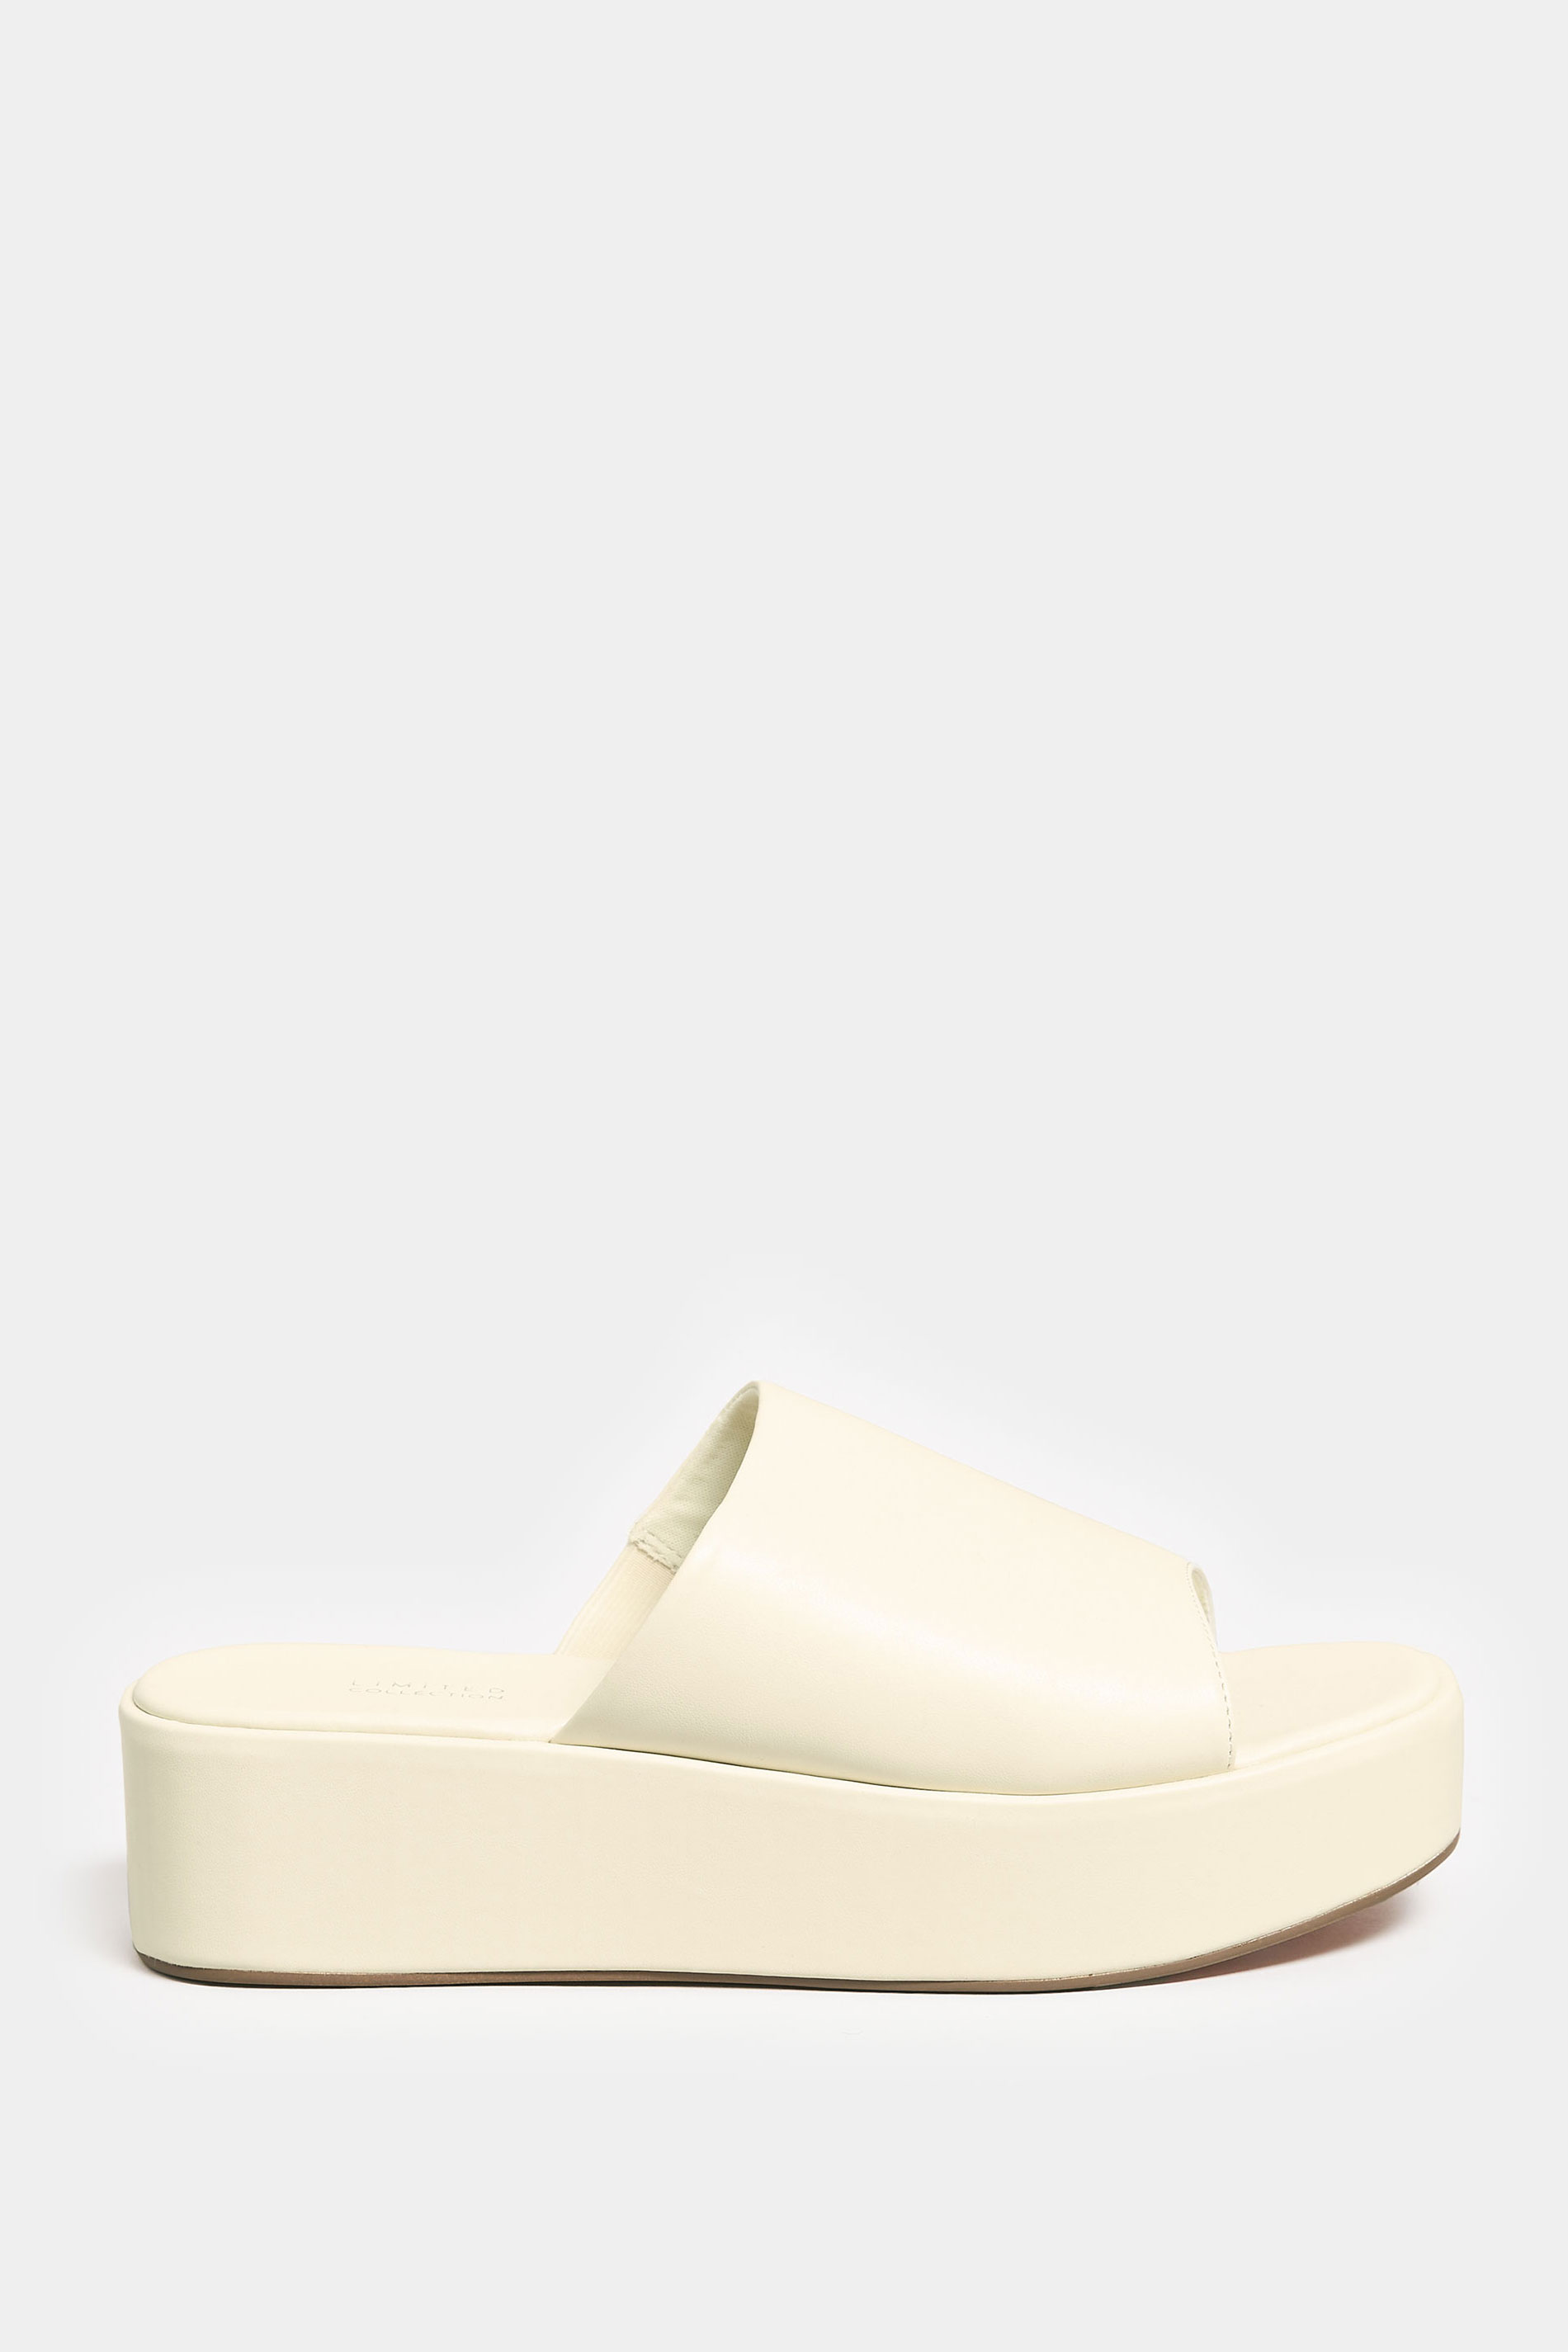 LIMITED COLLECTION White Platform Mule Sandals In E Wide Fit & EEE Extra Wide Fit |  Yours Clothing  3